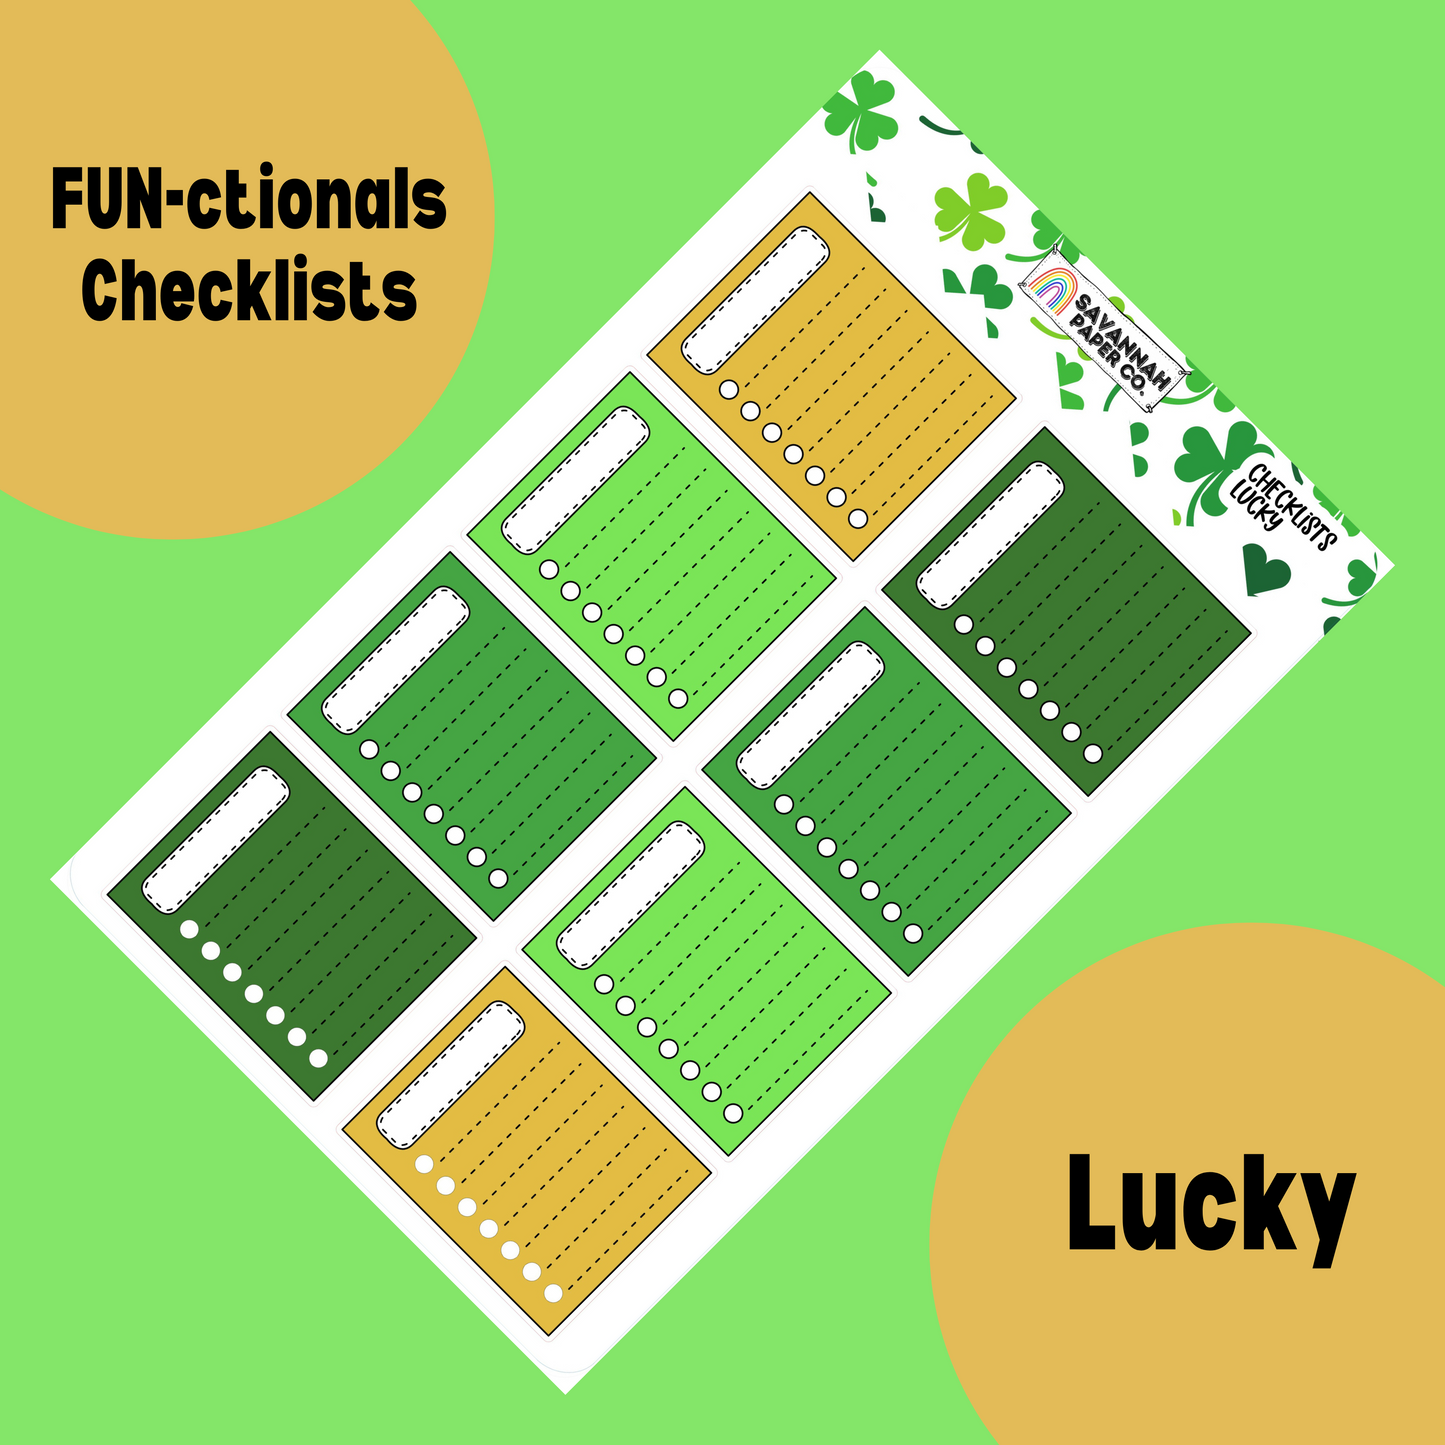 Lucky Checklists